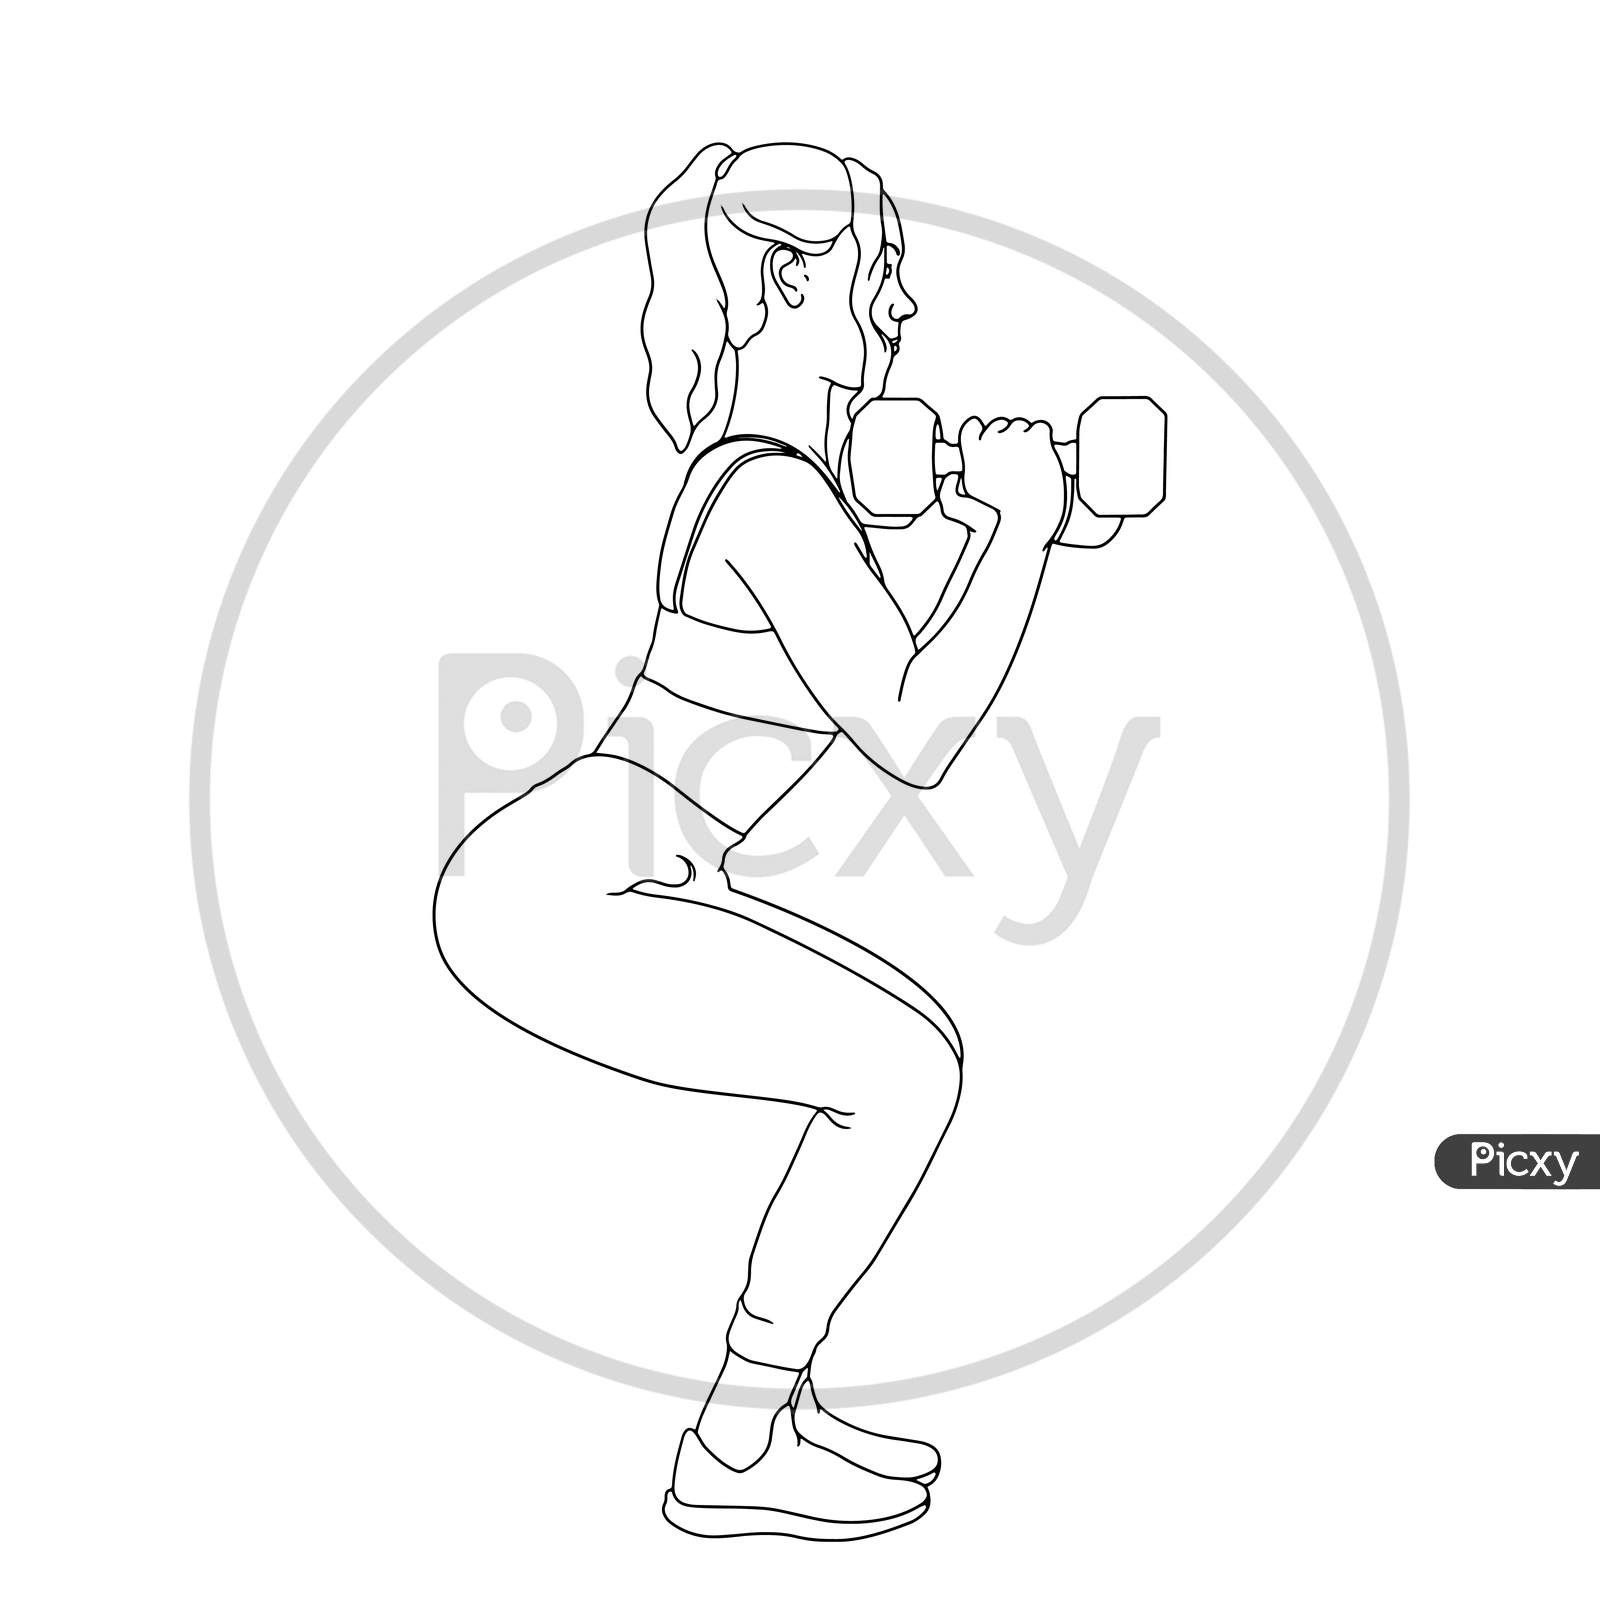 Coloring Pages - Women Exercise With Dumbbell Hand-Drawn Illustration Of Gym.